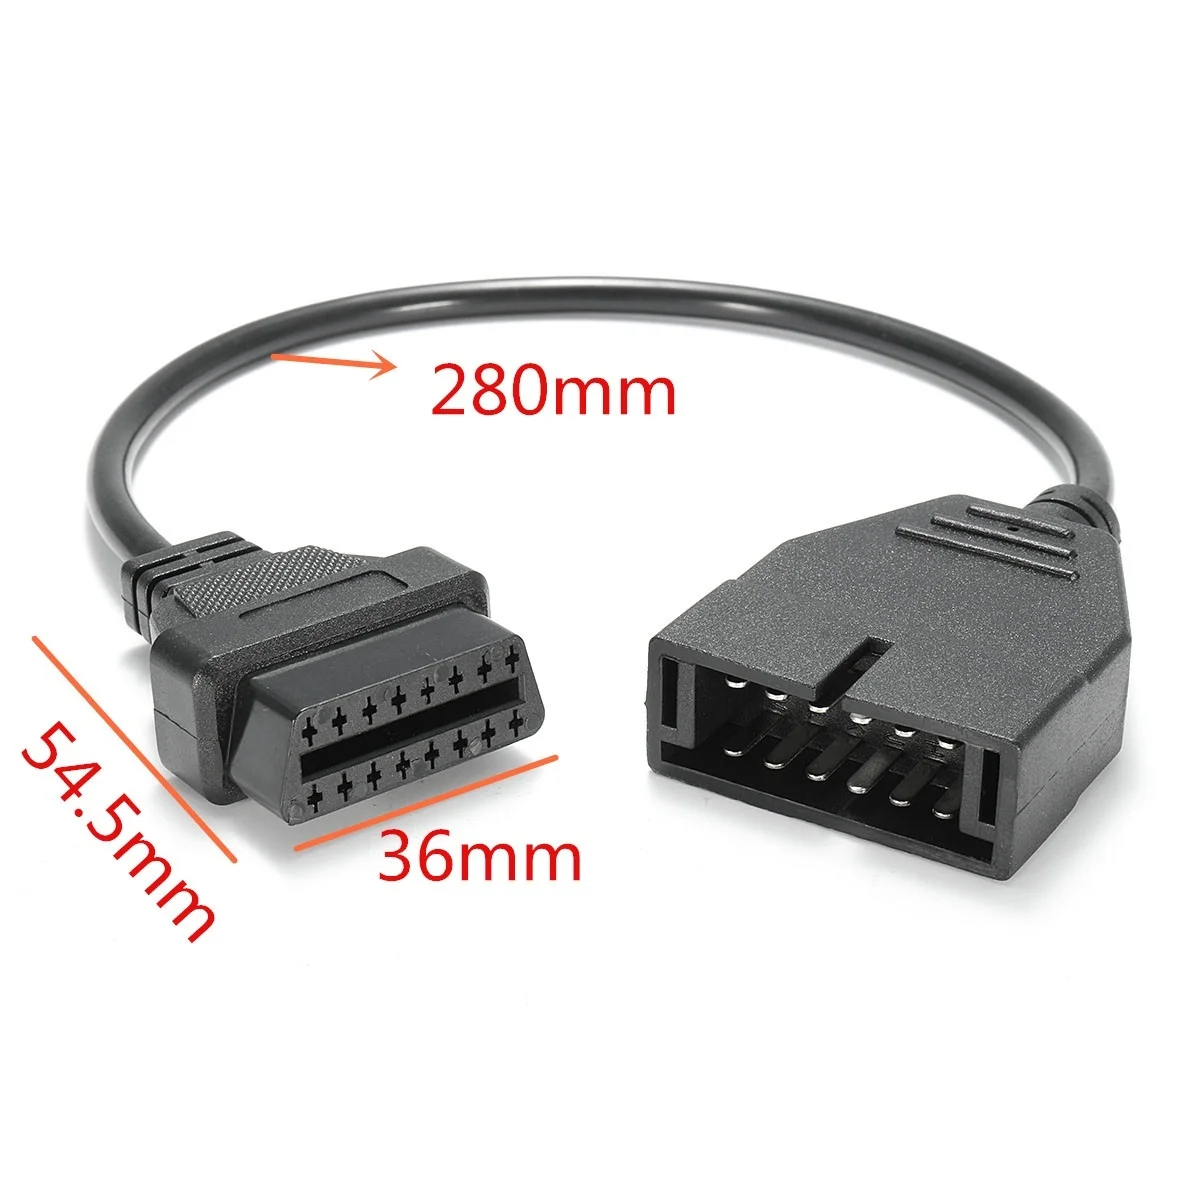 Connector For GM OBD 12 Pin OBD1 To 16 Pin OBD2 Convertor Adapter Cable Diagnostic Scanner Auto Diagnostic Connector Adapter